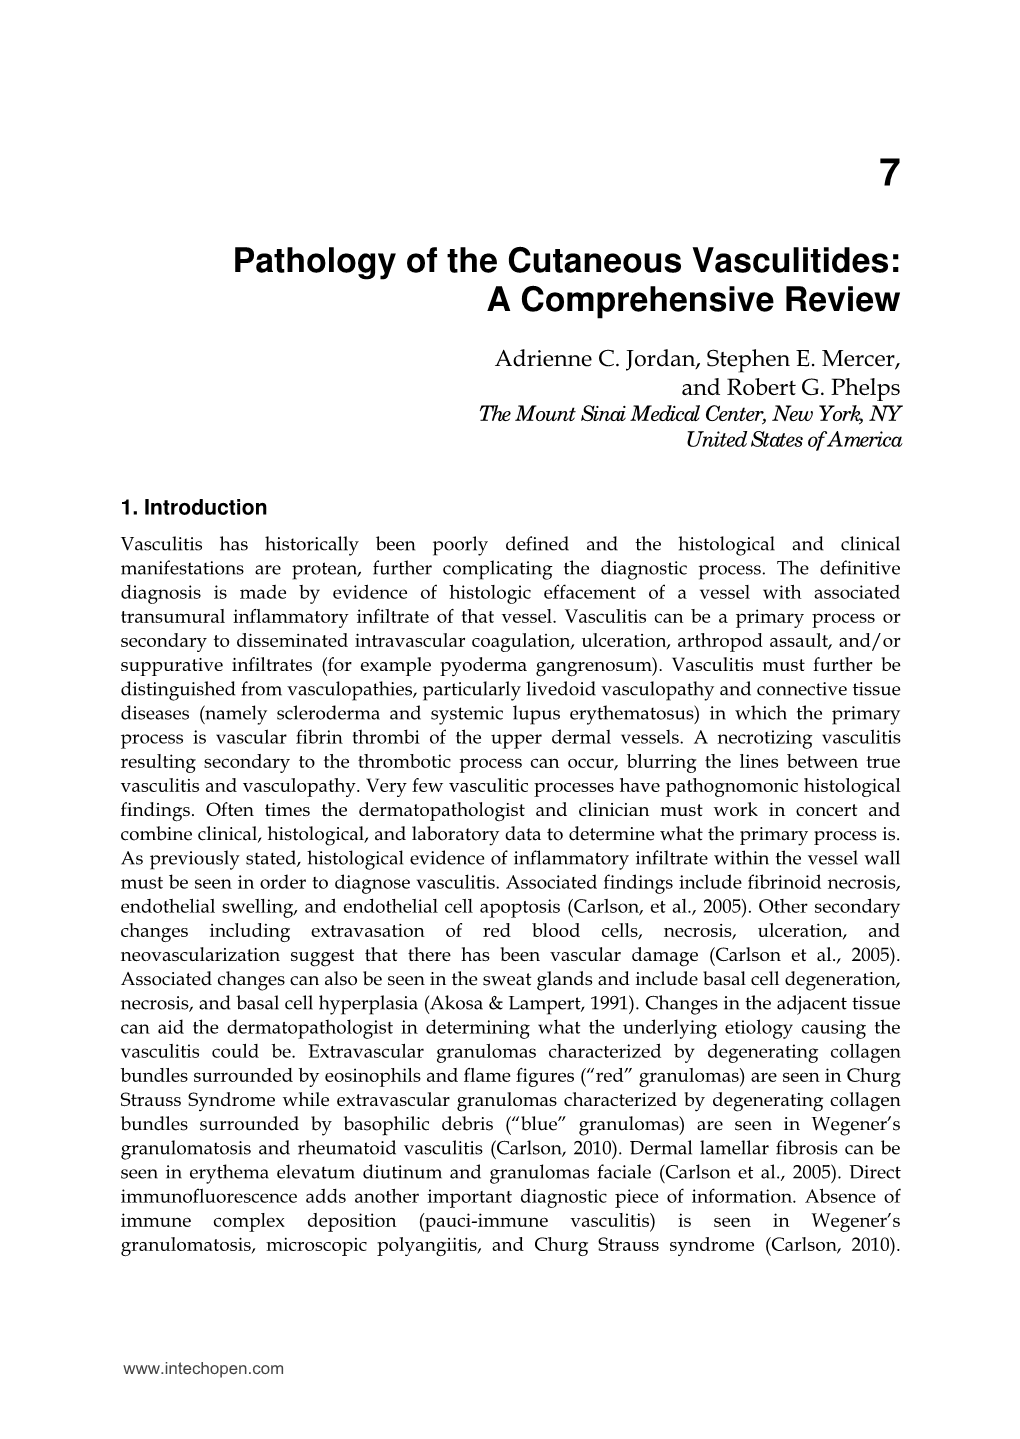 Pathology of the Cutaneous Vasculitides: a Comprehensive Review